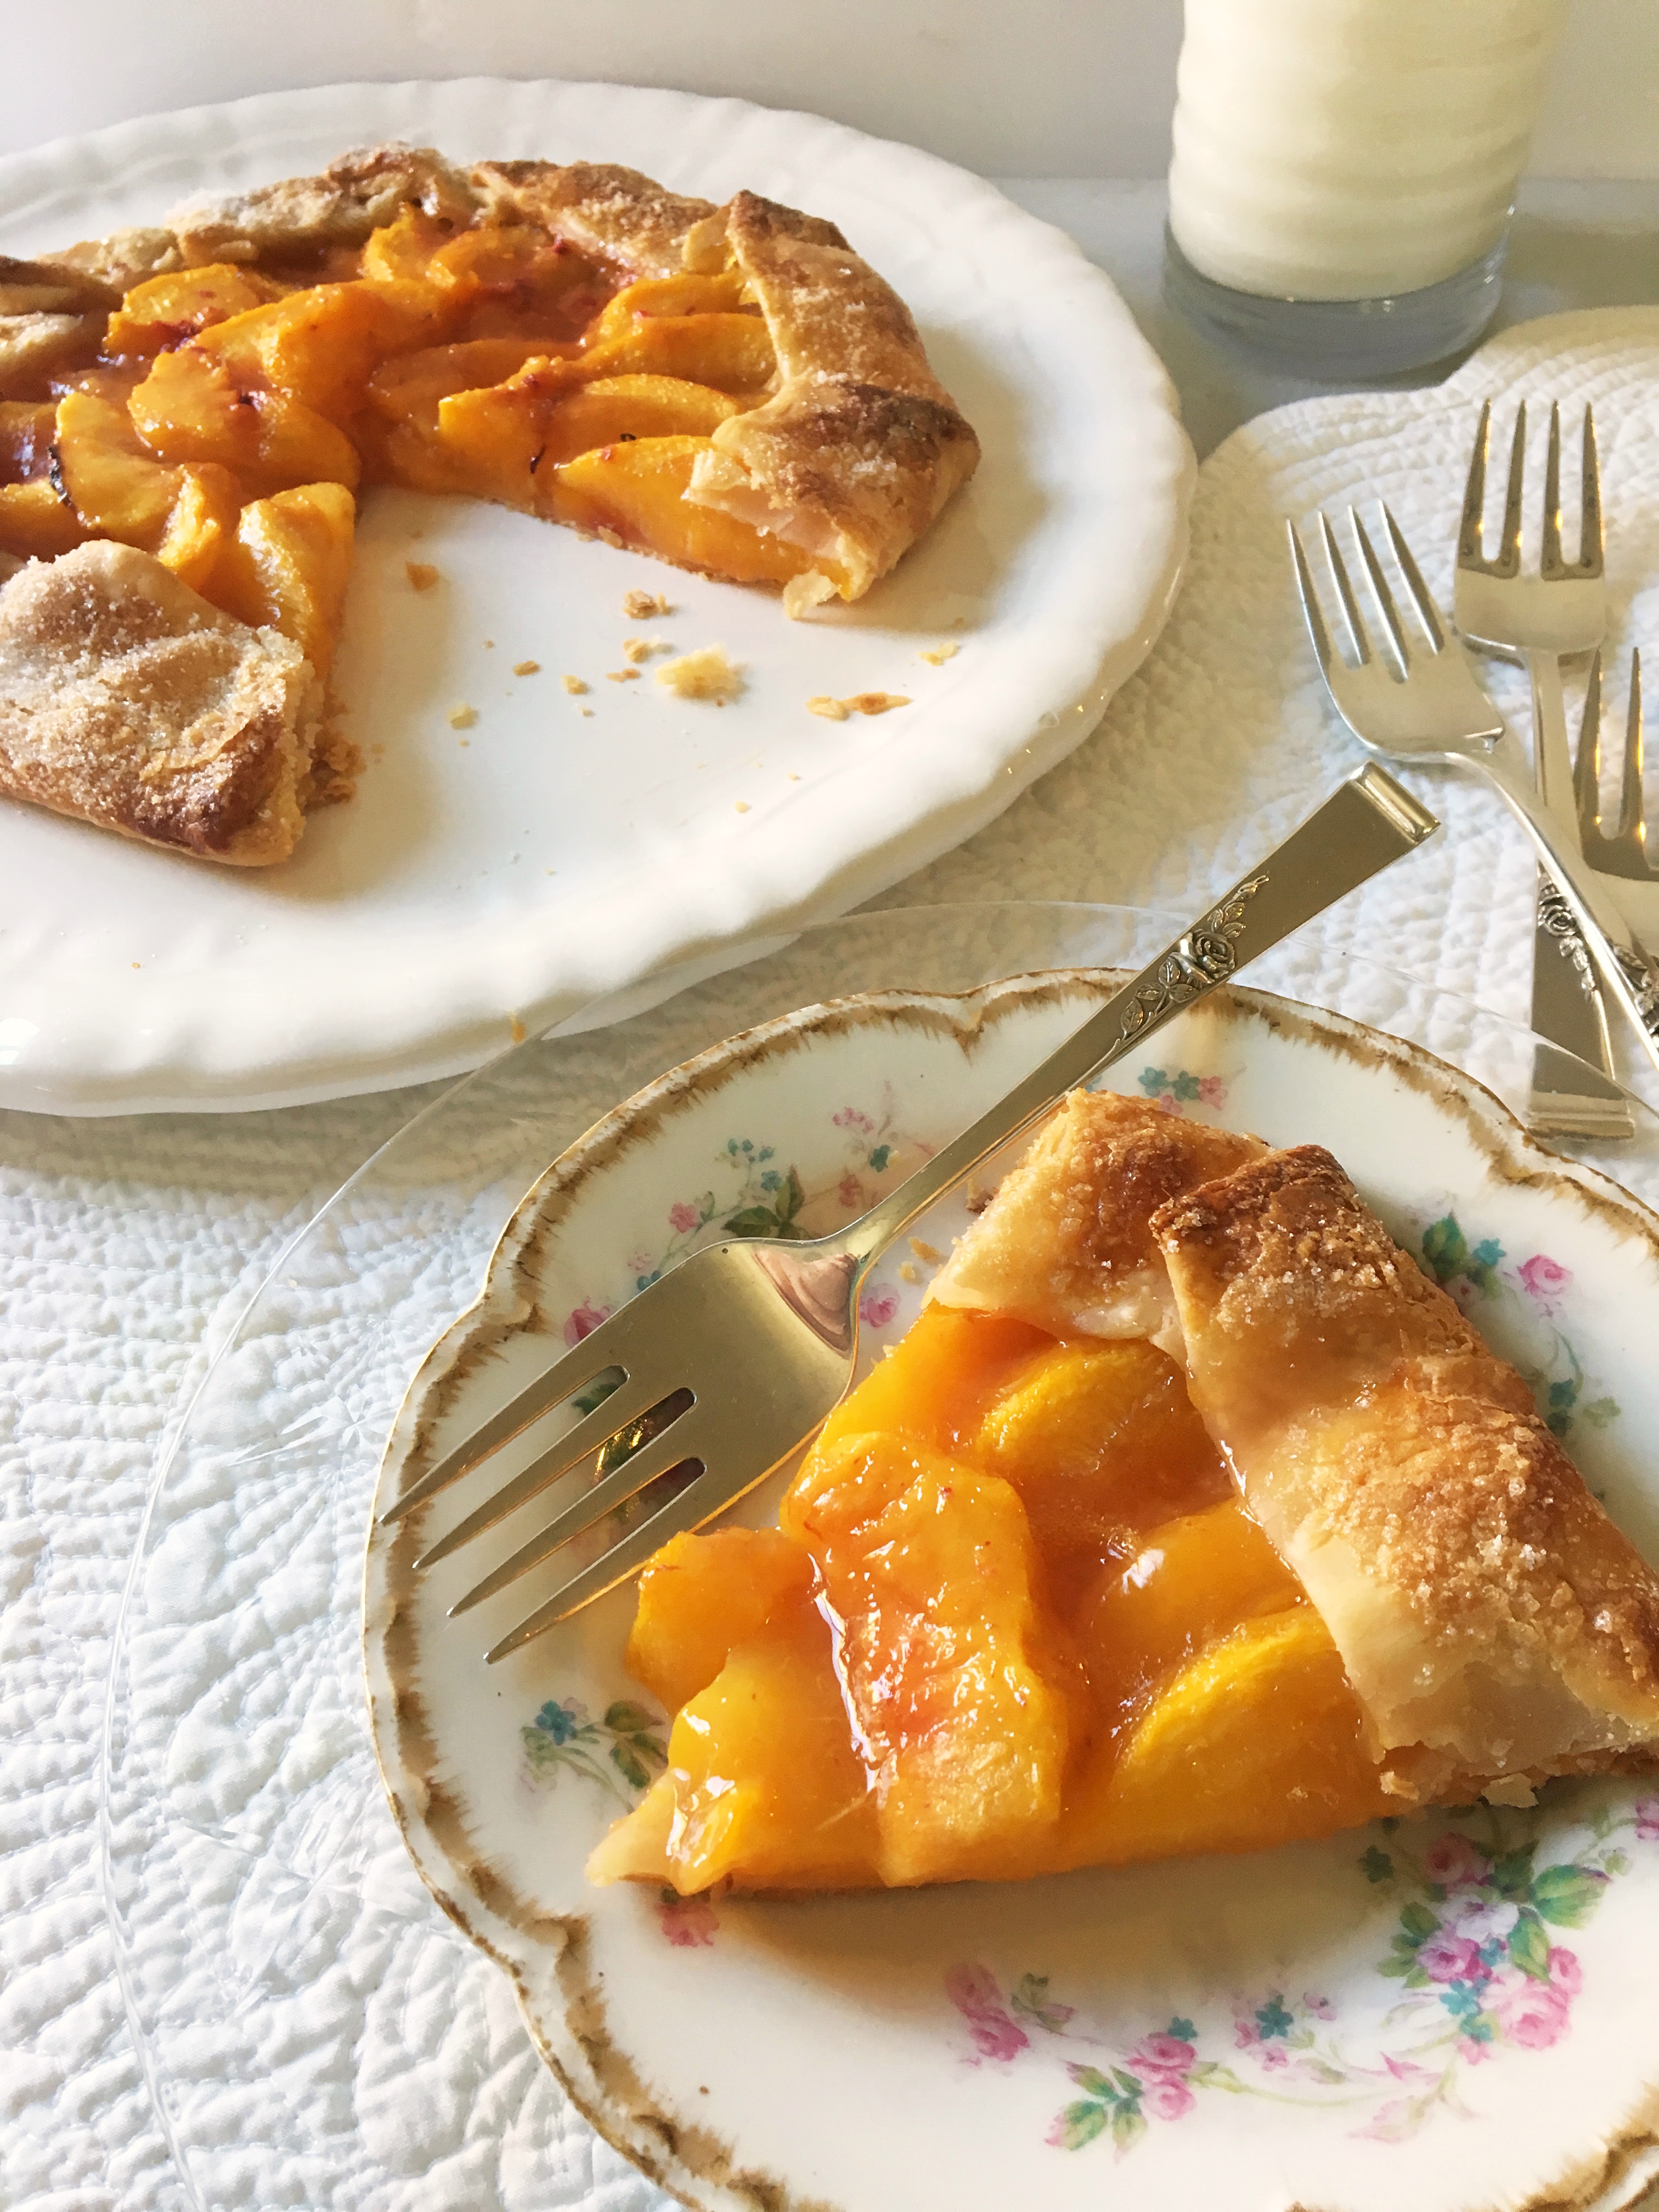 Slice of fresh peach galette on small plate with platter and remaining galette.